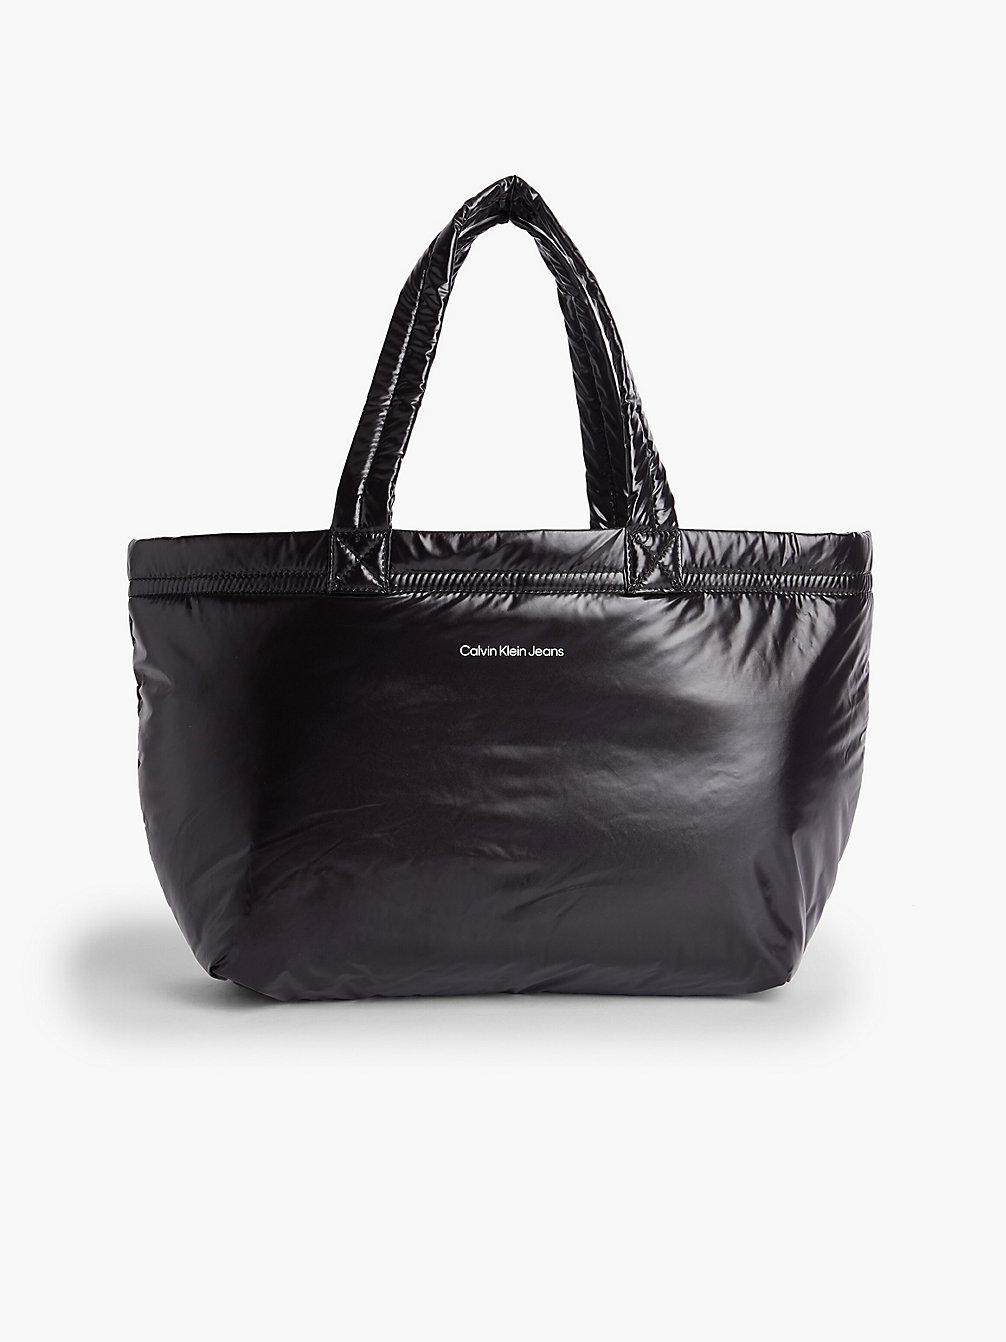 BLACK SILVER Recycled Reversible Puffer Tote Bag undefined women Calvin Klein